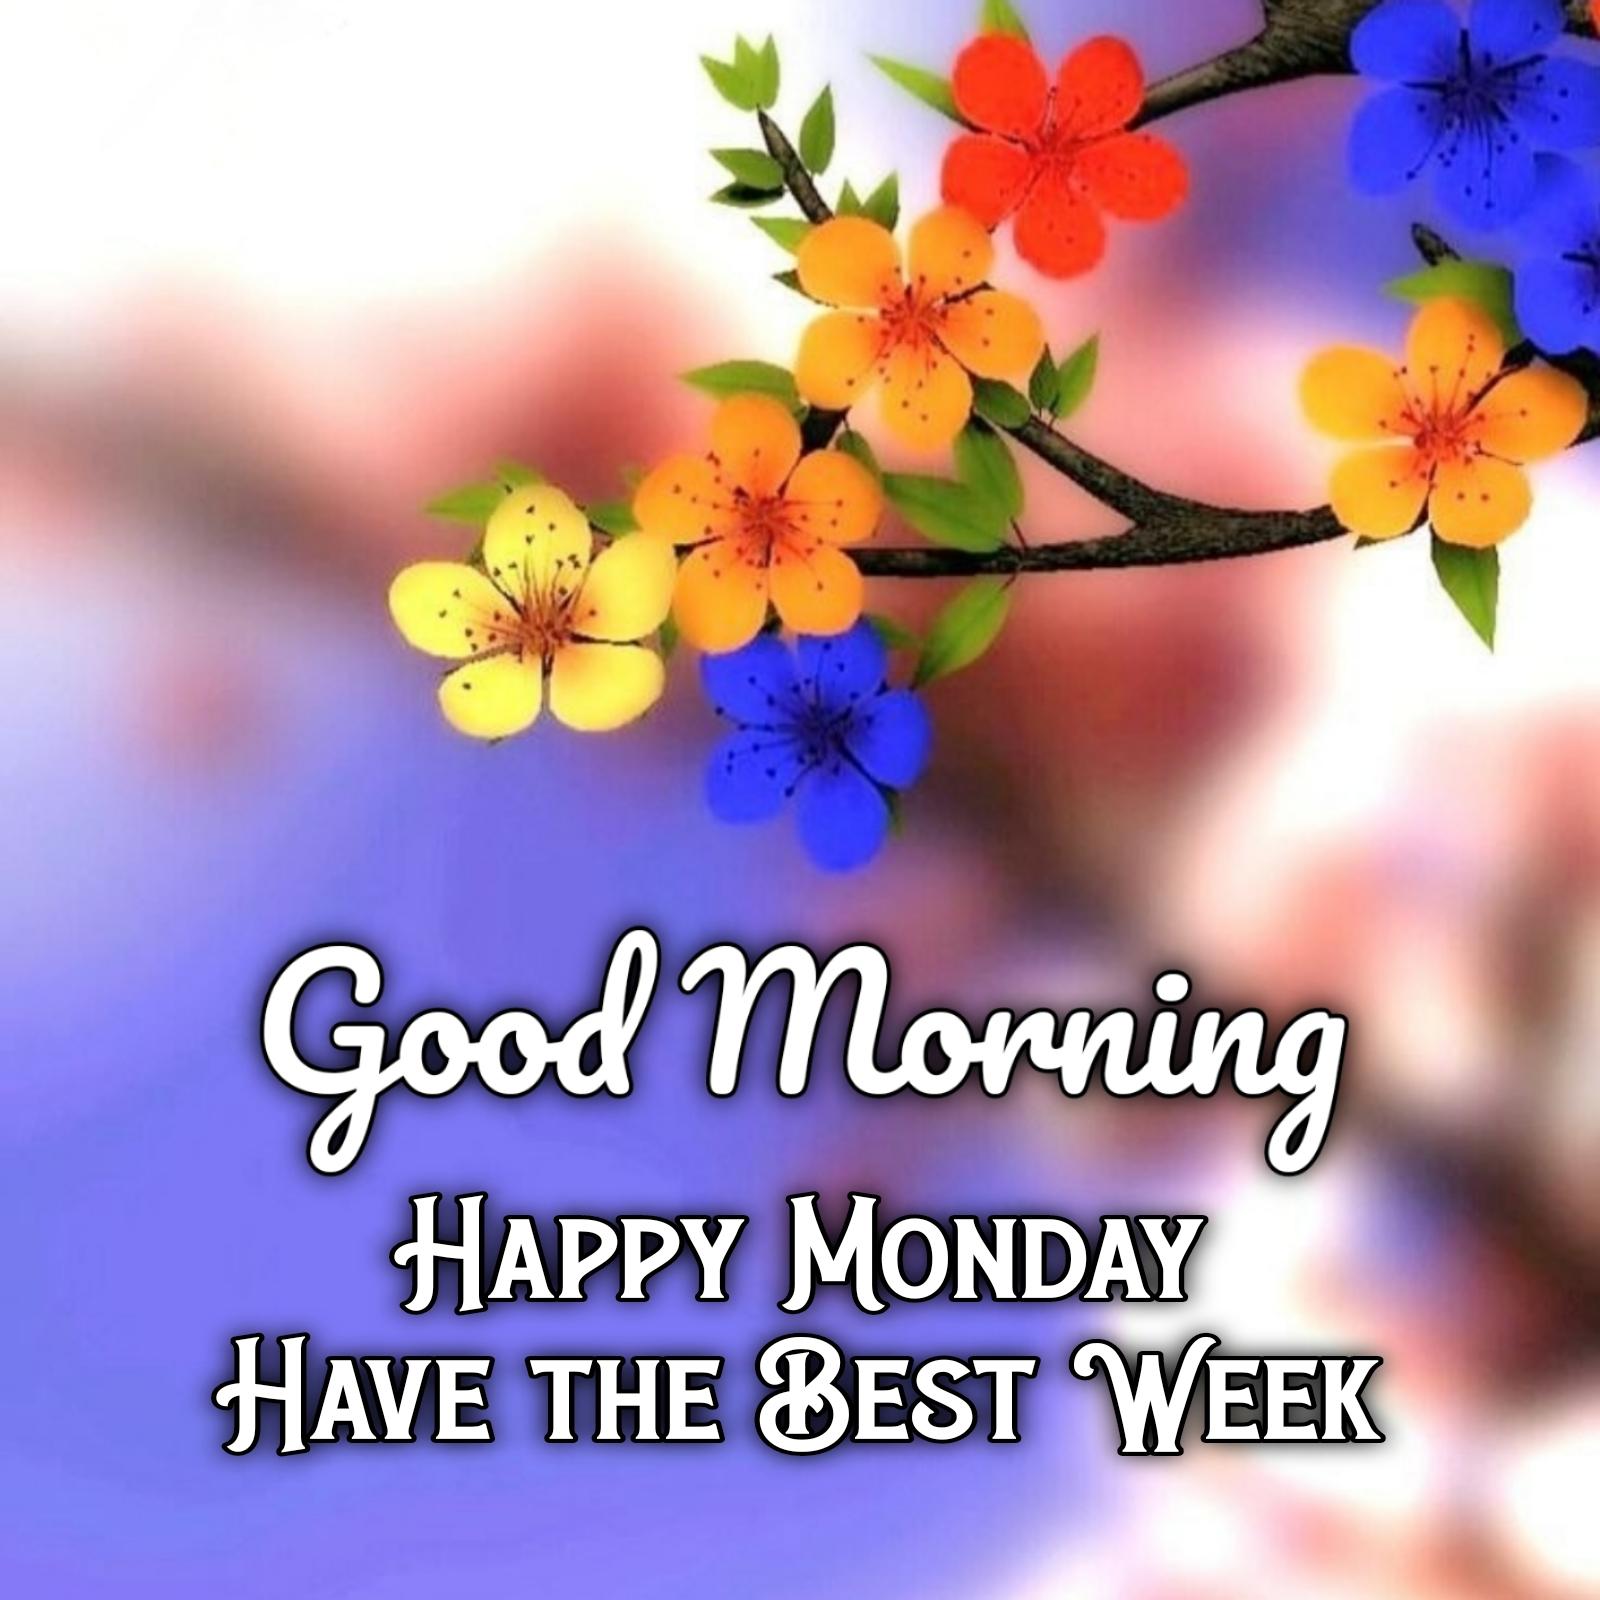 New Good Morning Happy Monday Images 2022 HD Download